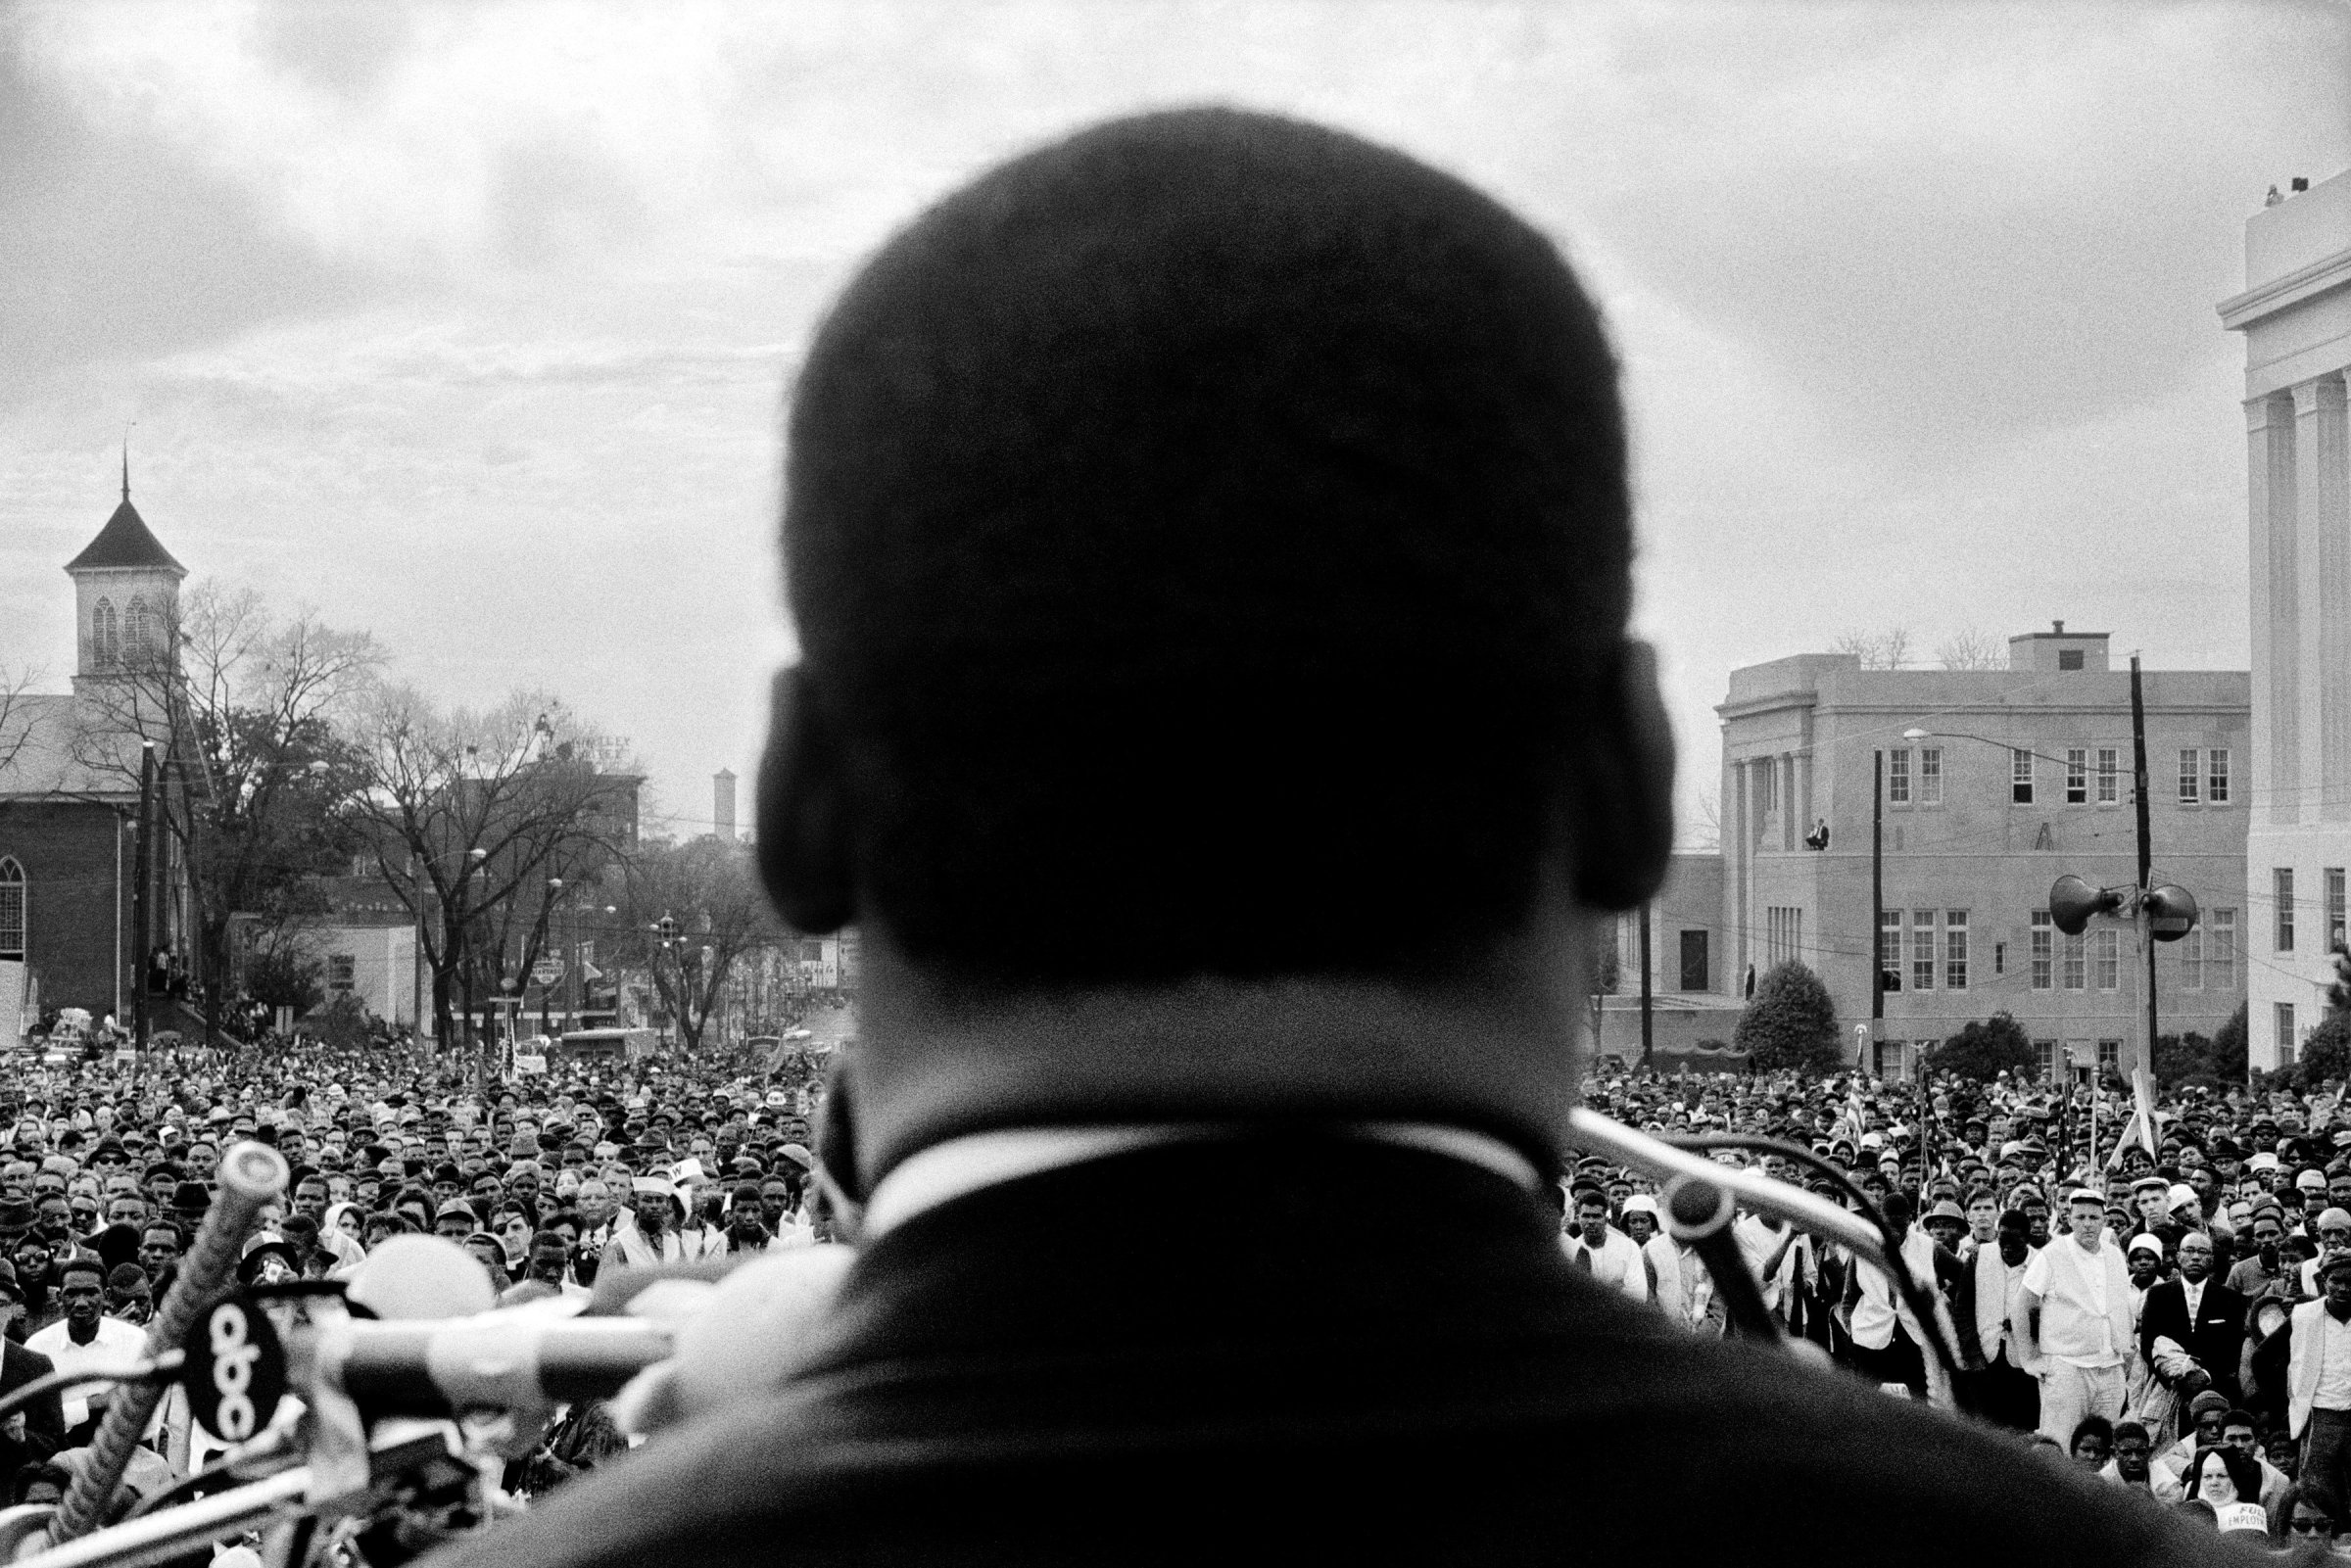 Dr. Martin Luther King, Jr. spoke in front of 25,000 civil rights marchers at the conclusion of the Selma to Montgomery march in front of Alabama state capital building on March 25, 1965 in Montgomery, Ala.